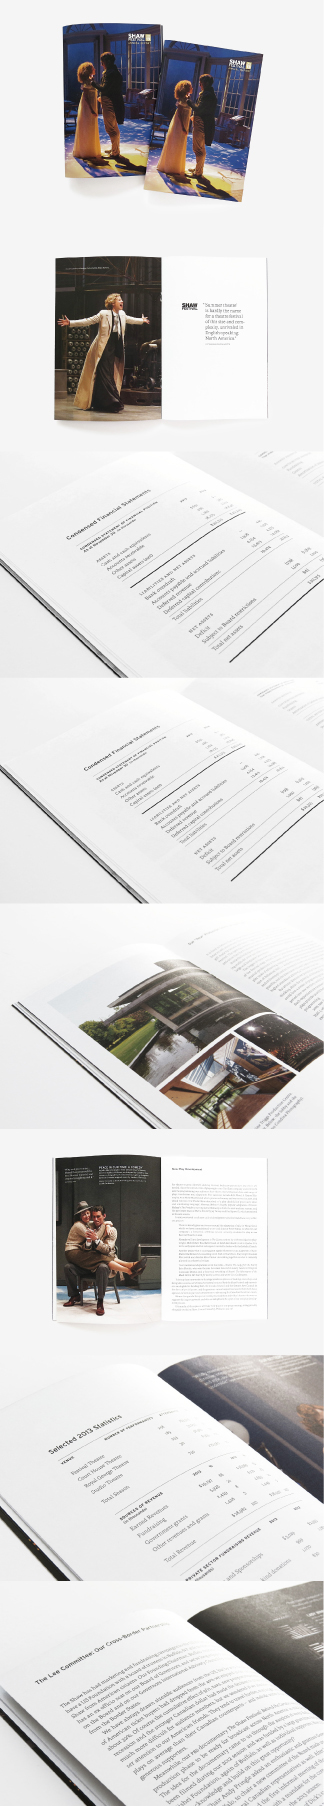 Layout annual report